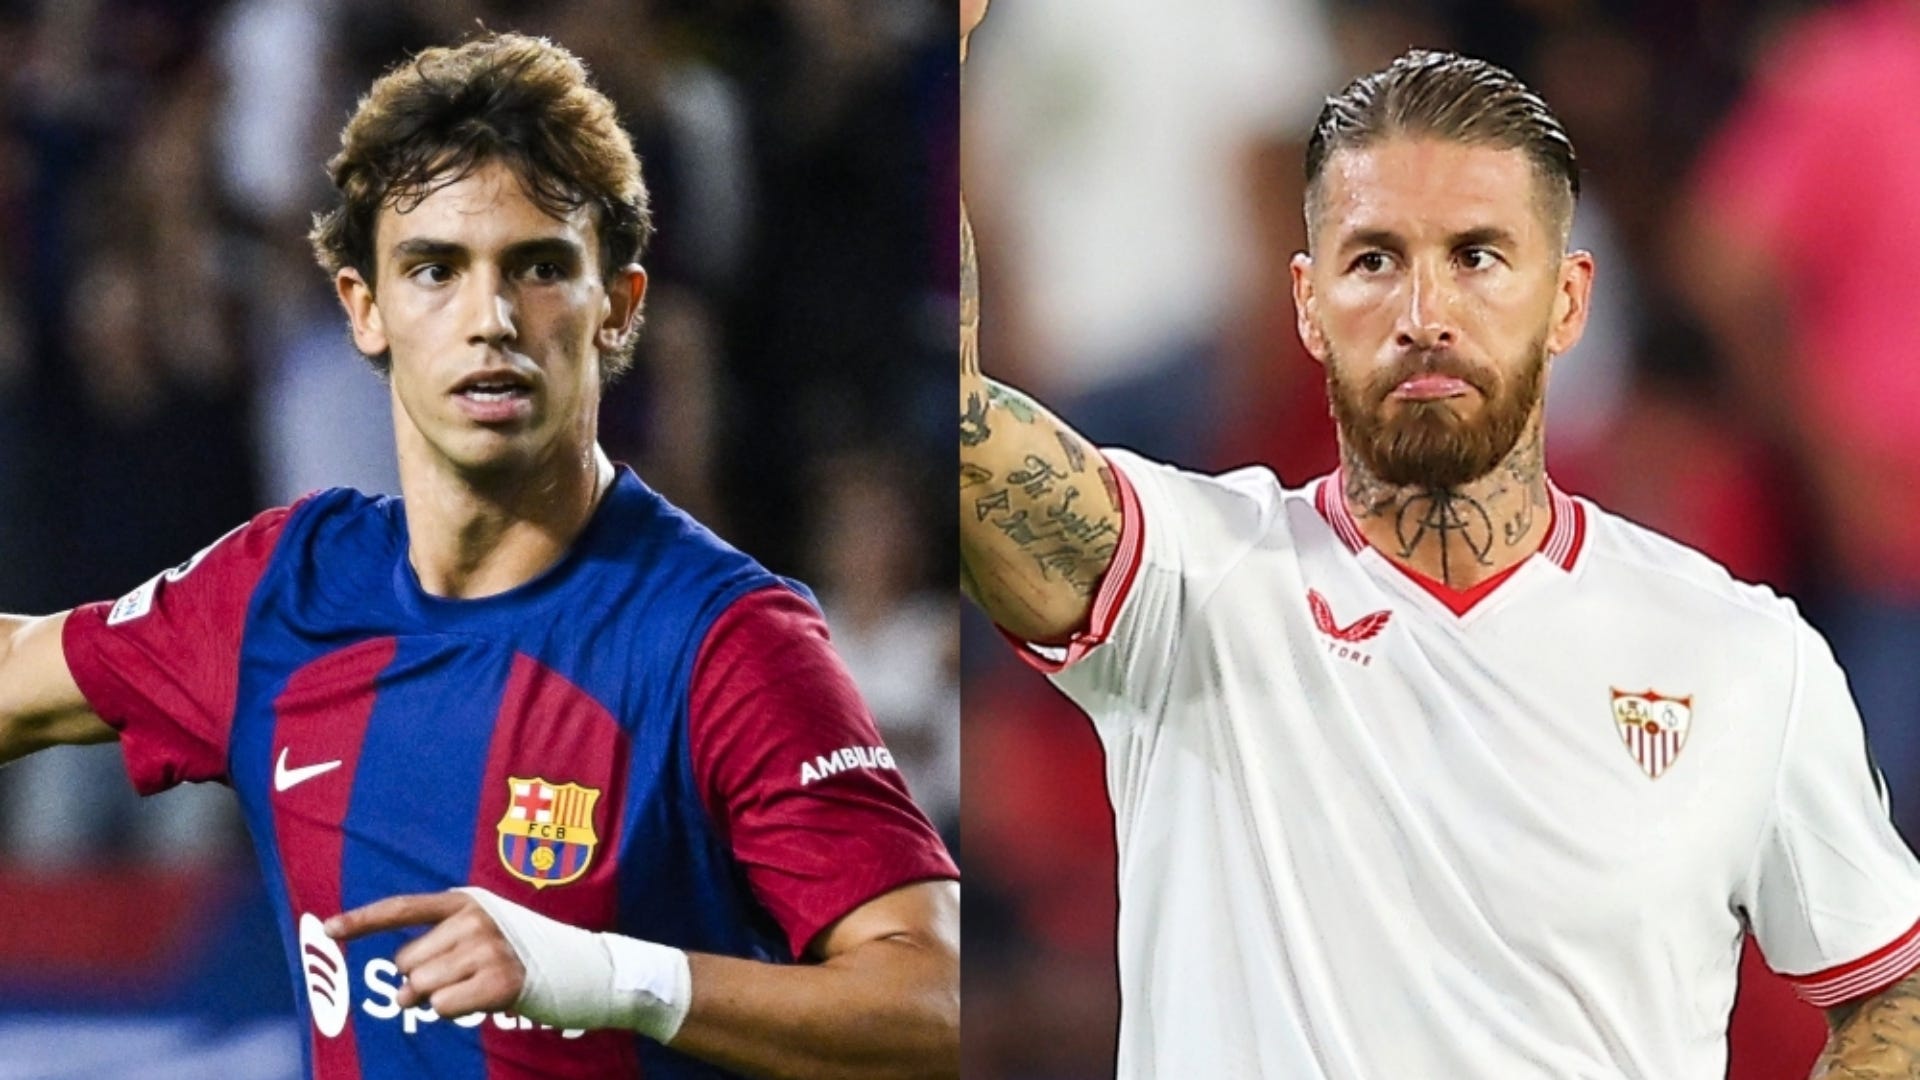 Barcelona vs Sevilla Live stream, TV channel, kick-off time and where to watch Goal US